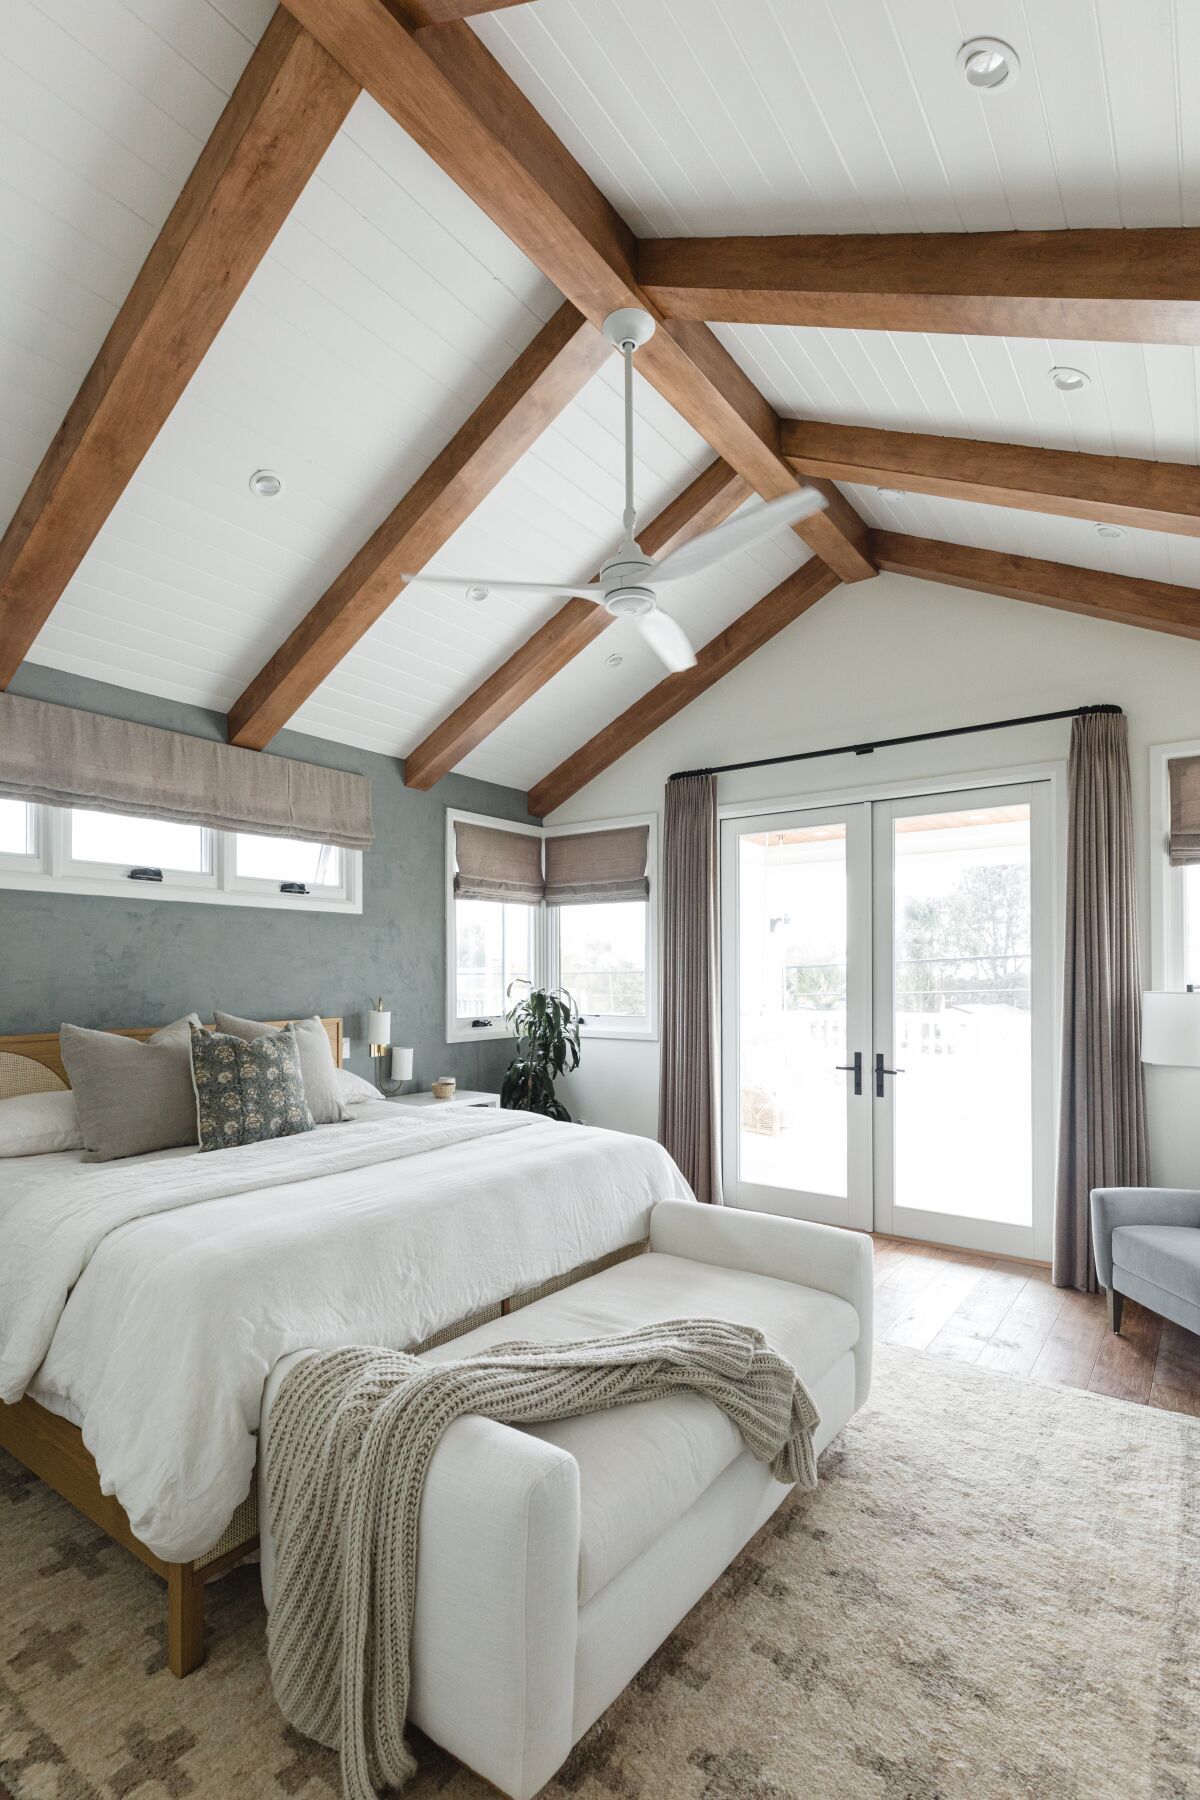 A spacious bedroom with a vaulted, wood-beam ceiling has organic materials, fabrics and colors throughout.